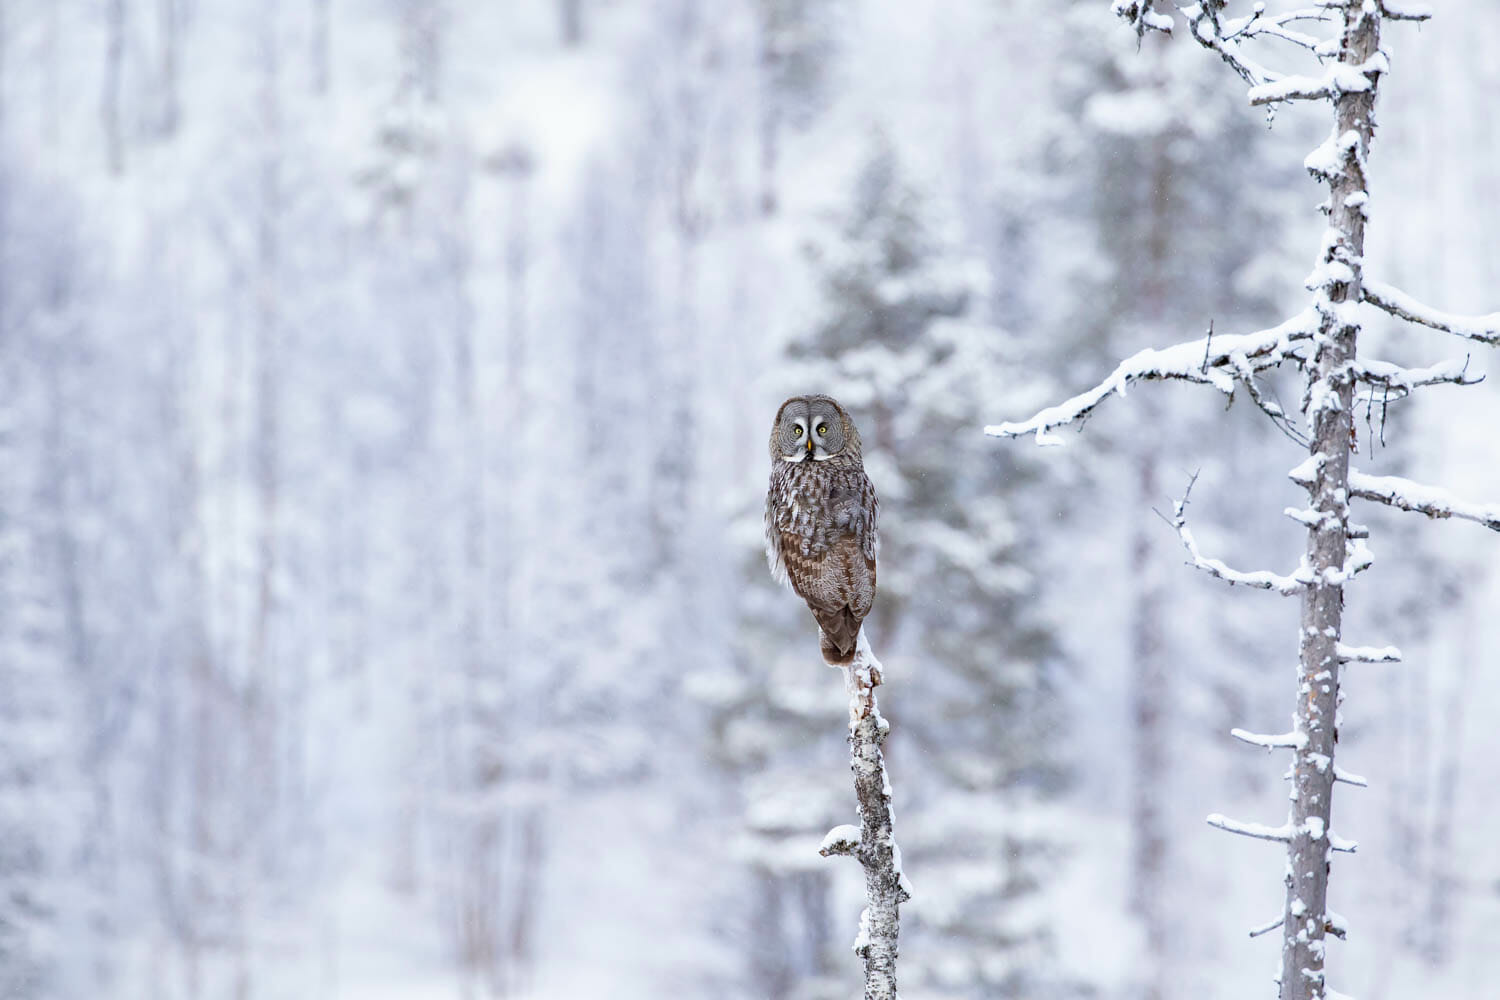 Owl Photography: How To Ethically Create Unique Images